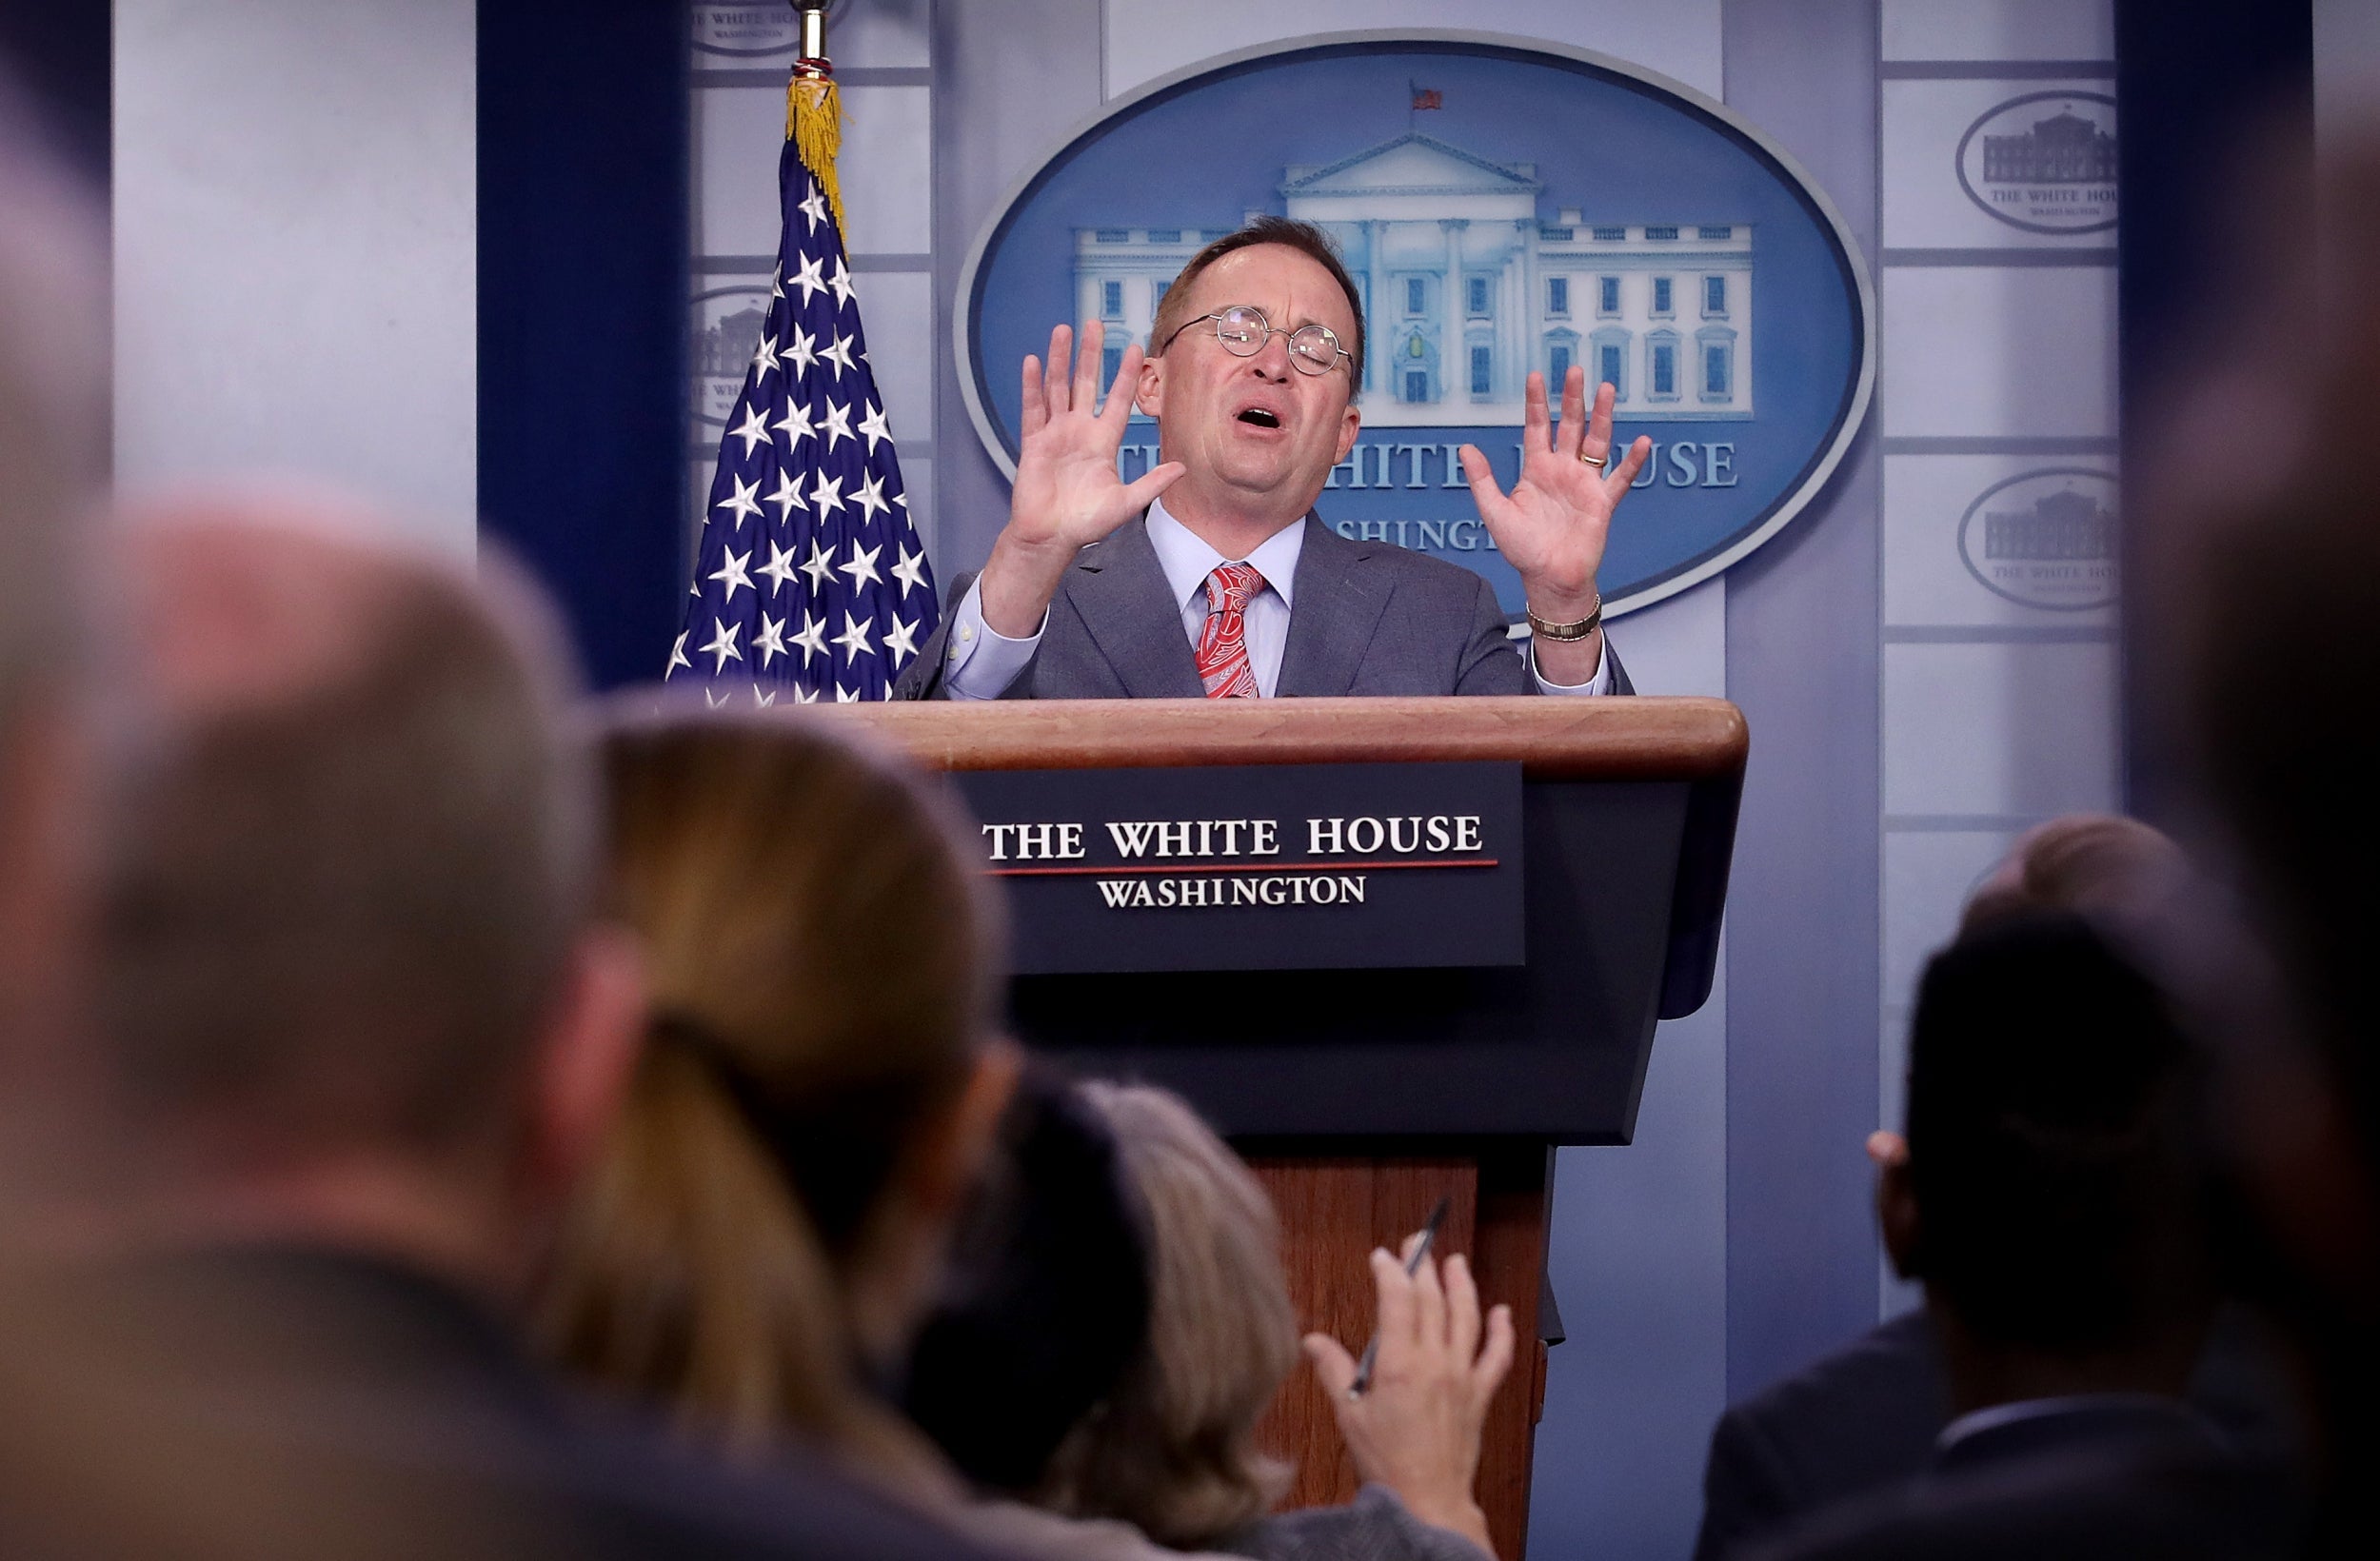 Mick Mulvaney, Donald Trump's acting chief of staff, at a press conference at the White House